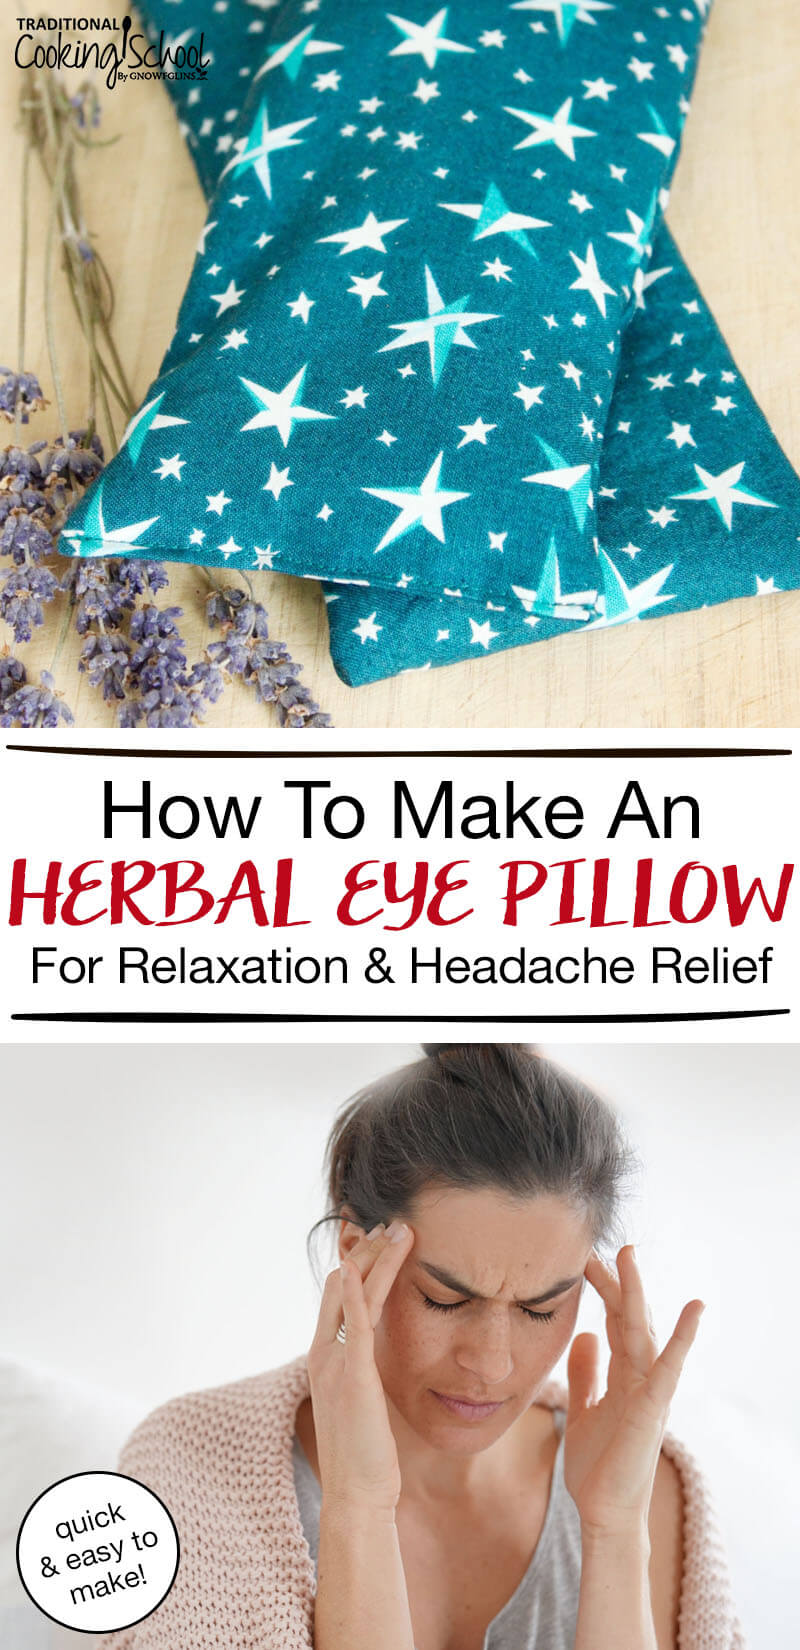 How To Make An Herbal Eye Pillow For Relaxation & Headache Relief | Tired eyes? Stressed? Have a headache? Can’t sleep? An herbal eye pillow may be just the thing you need! With the weight of the rice and the soothing scent of lavender, you can rest and relax to your heart's content. Plus, these pillows are so quick and easy to make, you can give them to all of your friends, too! | TraditionalCookingSchool.com